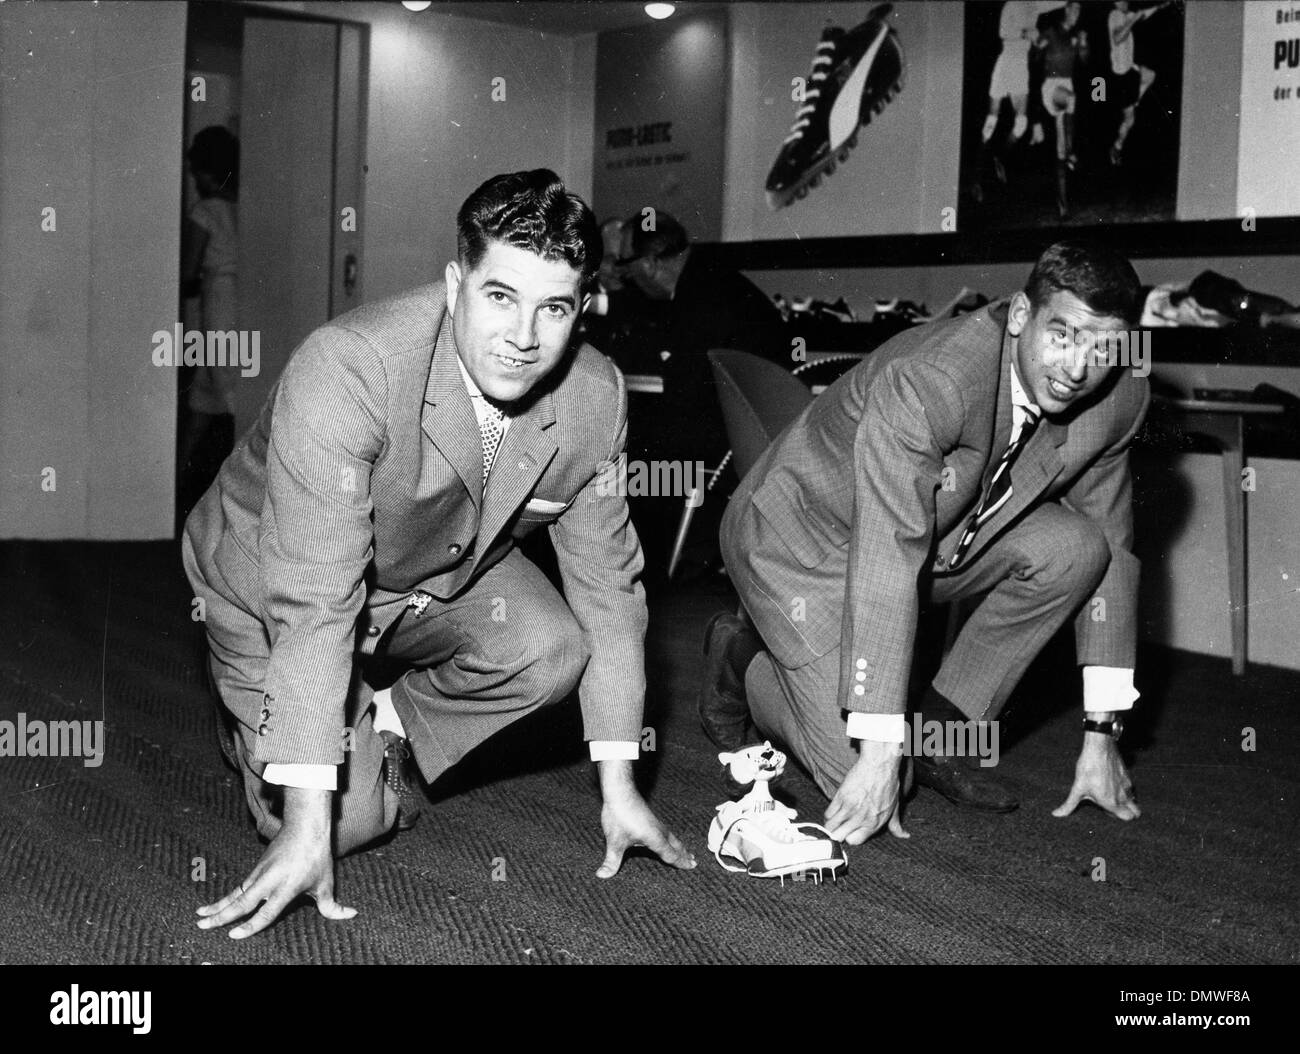 April 17, 1962 - Munich, Germany - German sprintersHEINZ FUTTERER and ARMIN HARY, are the new spokesmen for the 'Puma,' sportswear line, here they are modelling some track spikes. (Credit Image: © KEYSTONE Pictures USA/ZUMAPRESS.com) Stock Photo